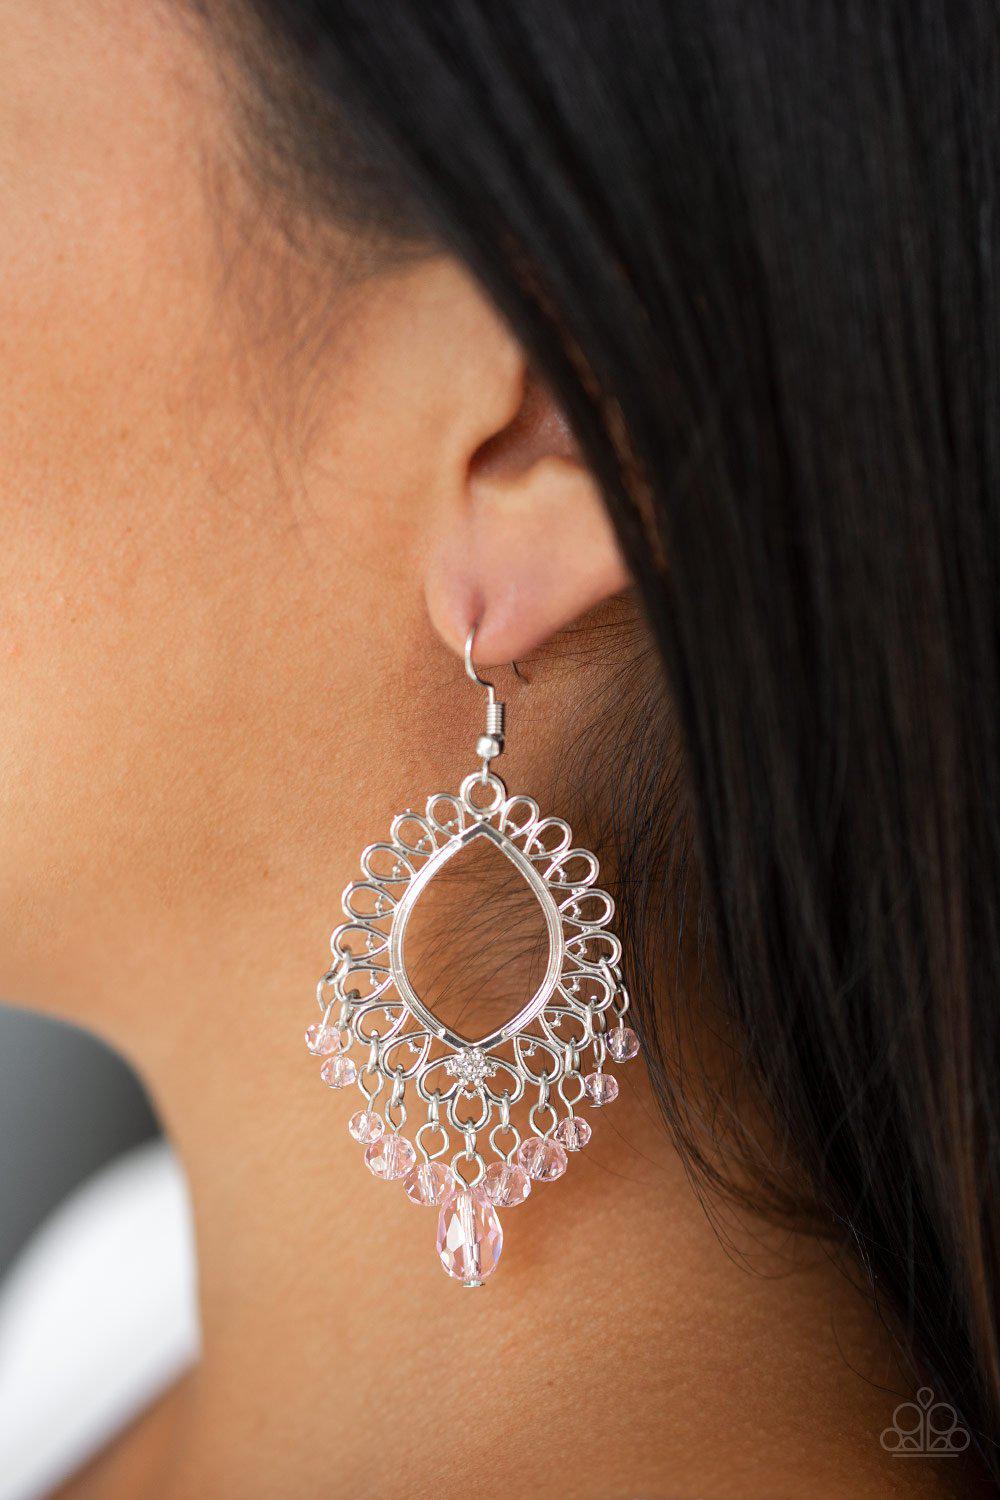 Just Say NOIR Pink and Silver Earrings - Paparazzi Accessories-CarasShop.com - $5 Jewelry by Cara Jewels